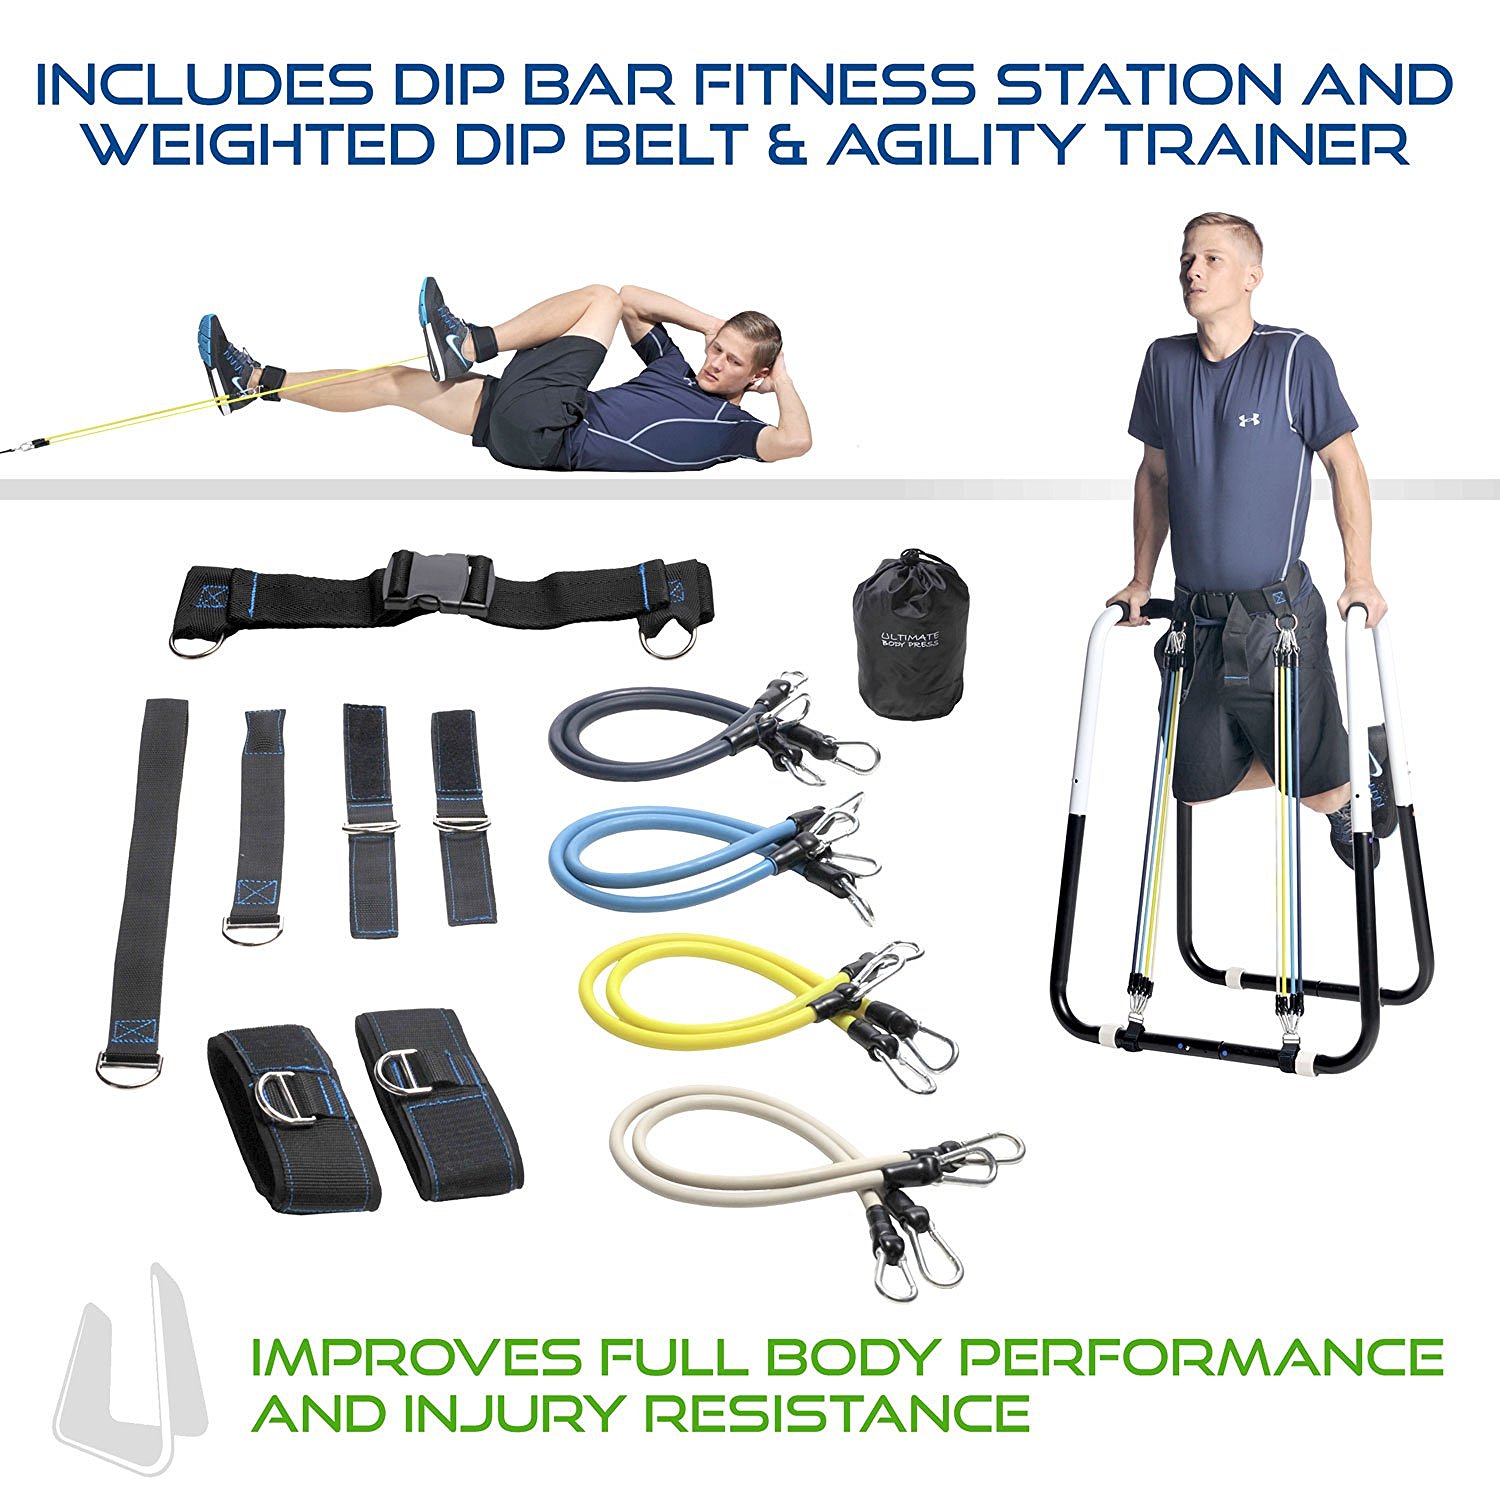 ultimate-body-press-dip-bar-fitness-station-agility-trainer